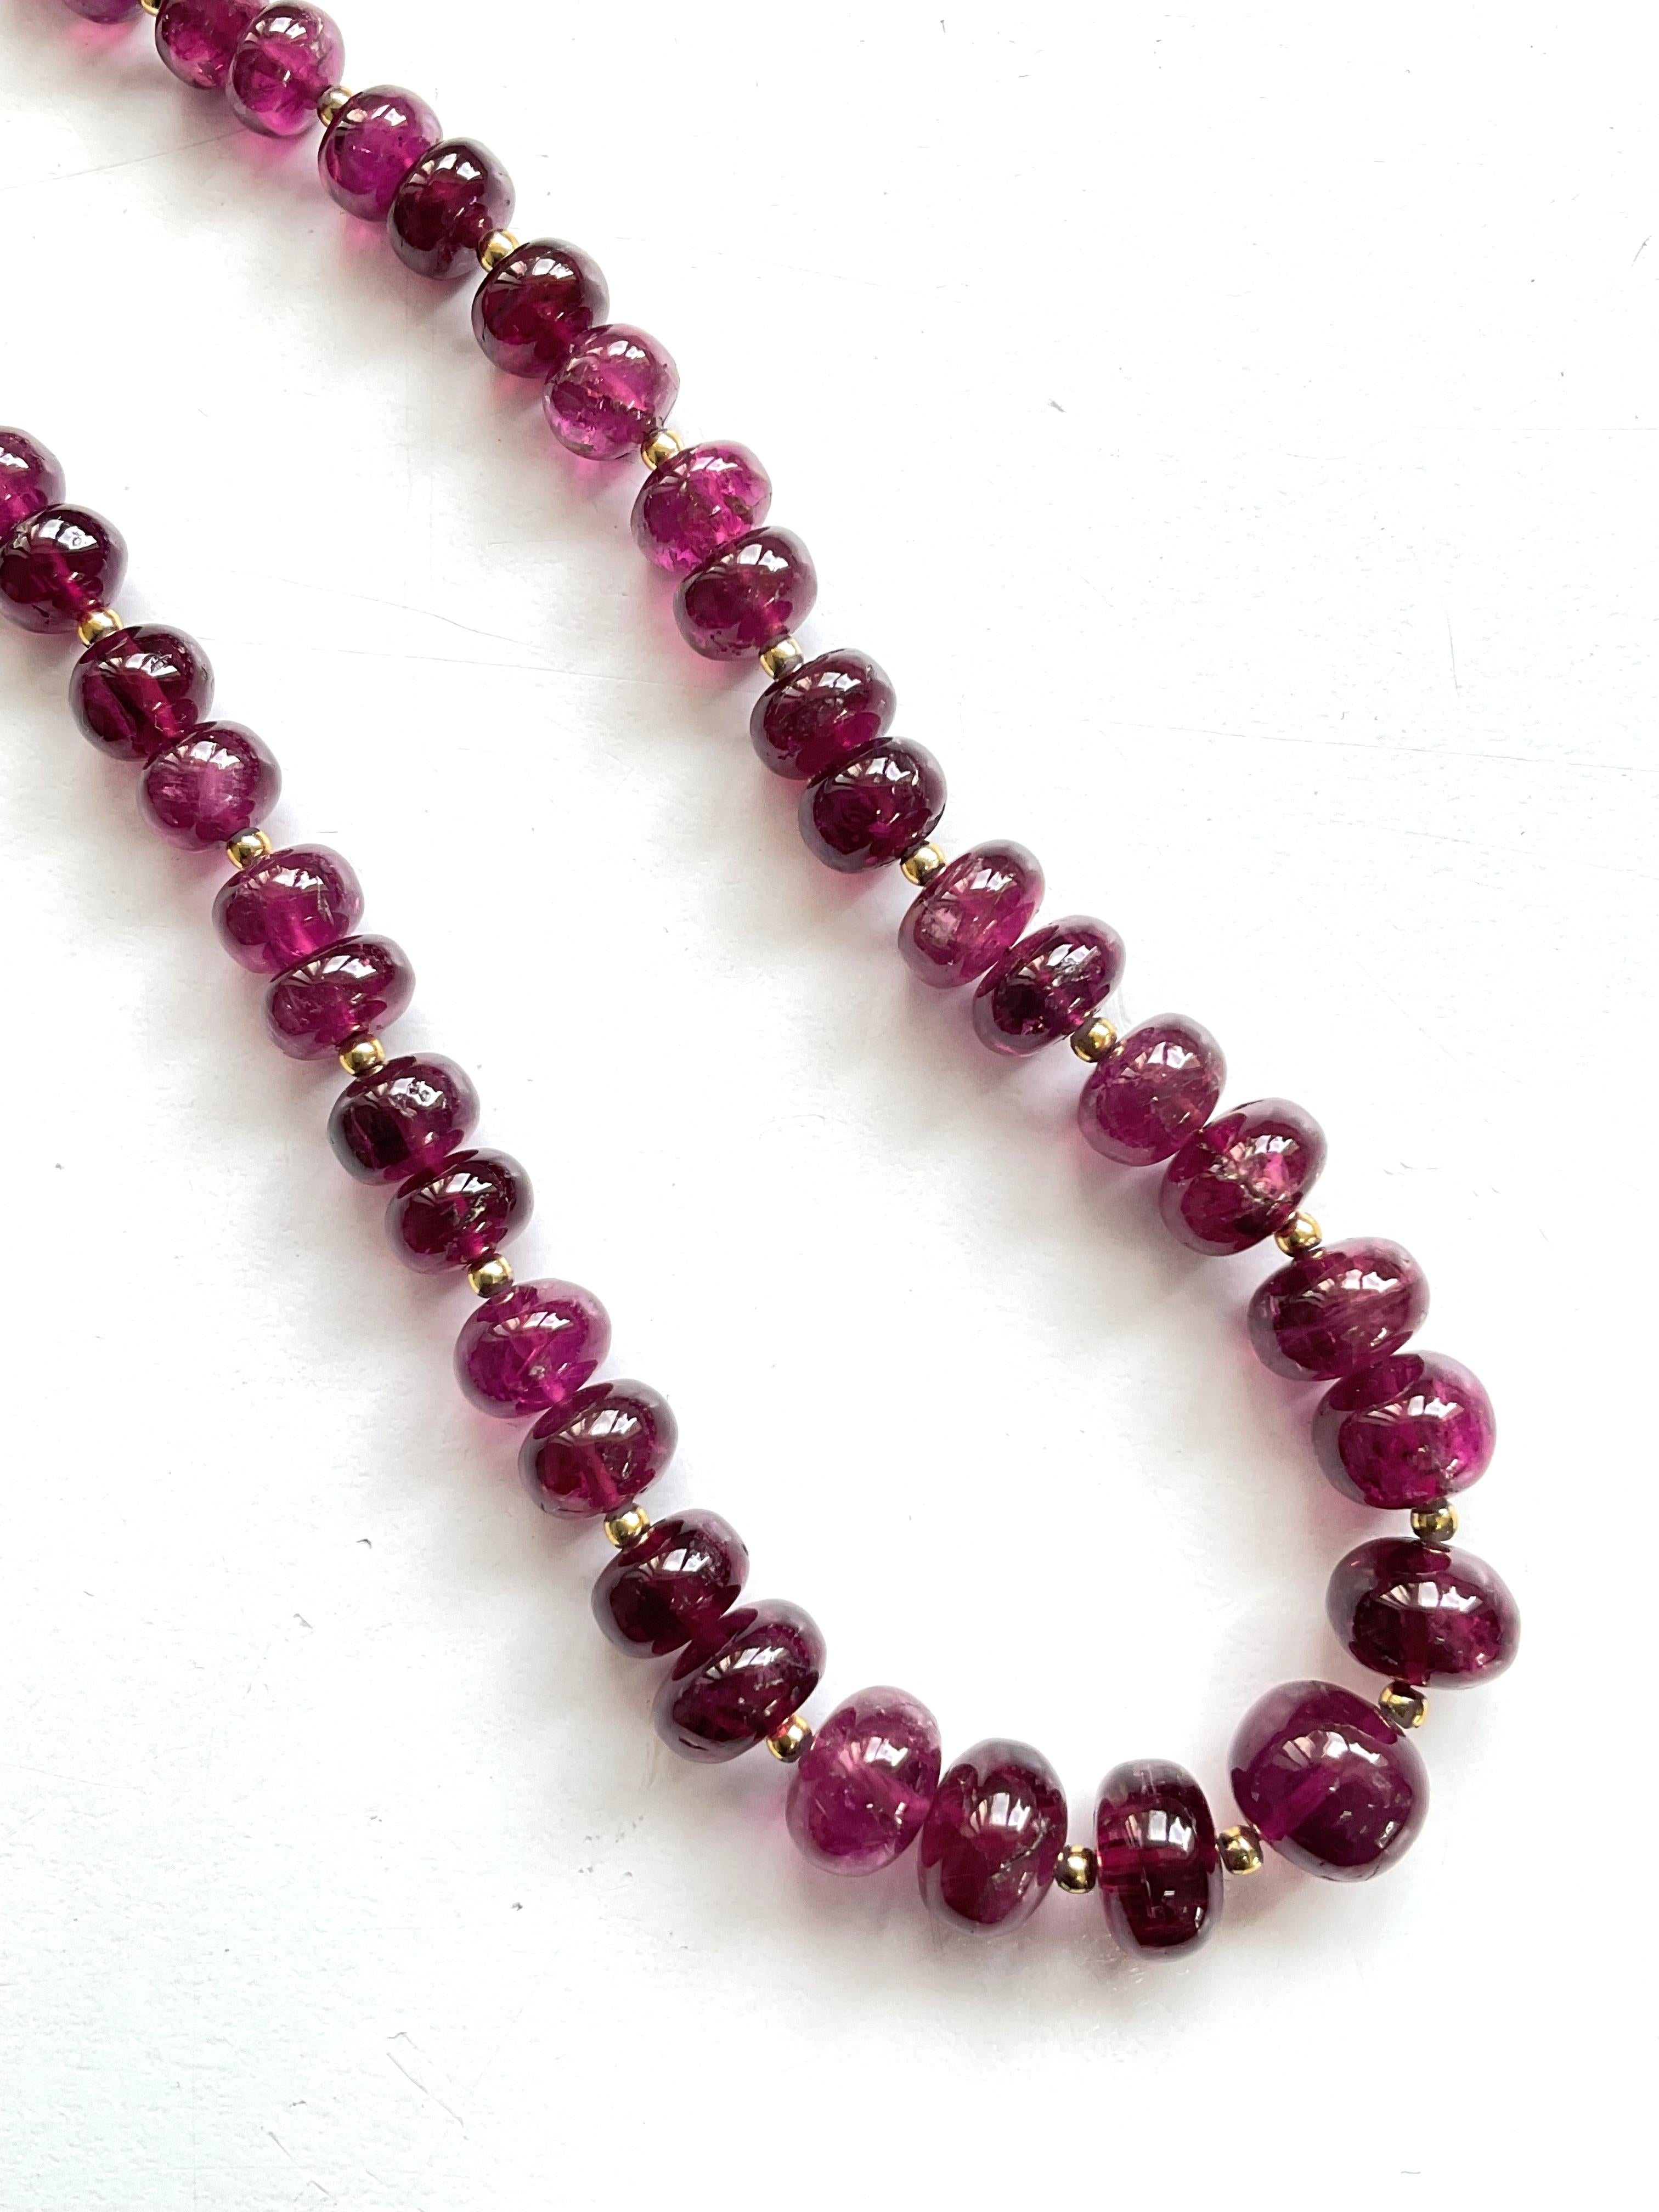 163.00 Carats Rubellite Tourmaline Plain Beads For Top Fine Jewelry Natural Gem In New Condition For Sale In Jaipur, RJ